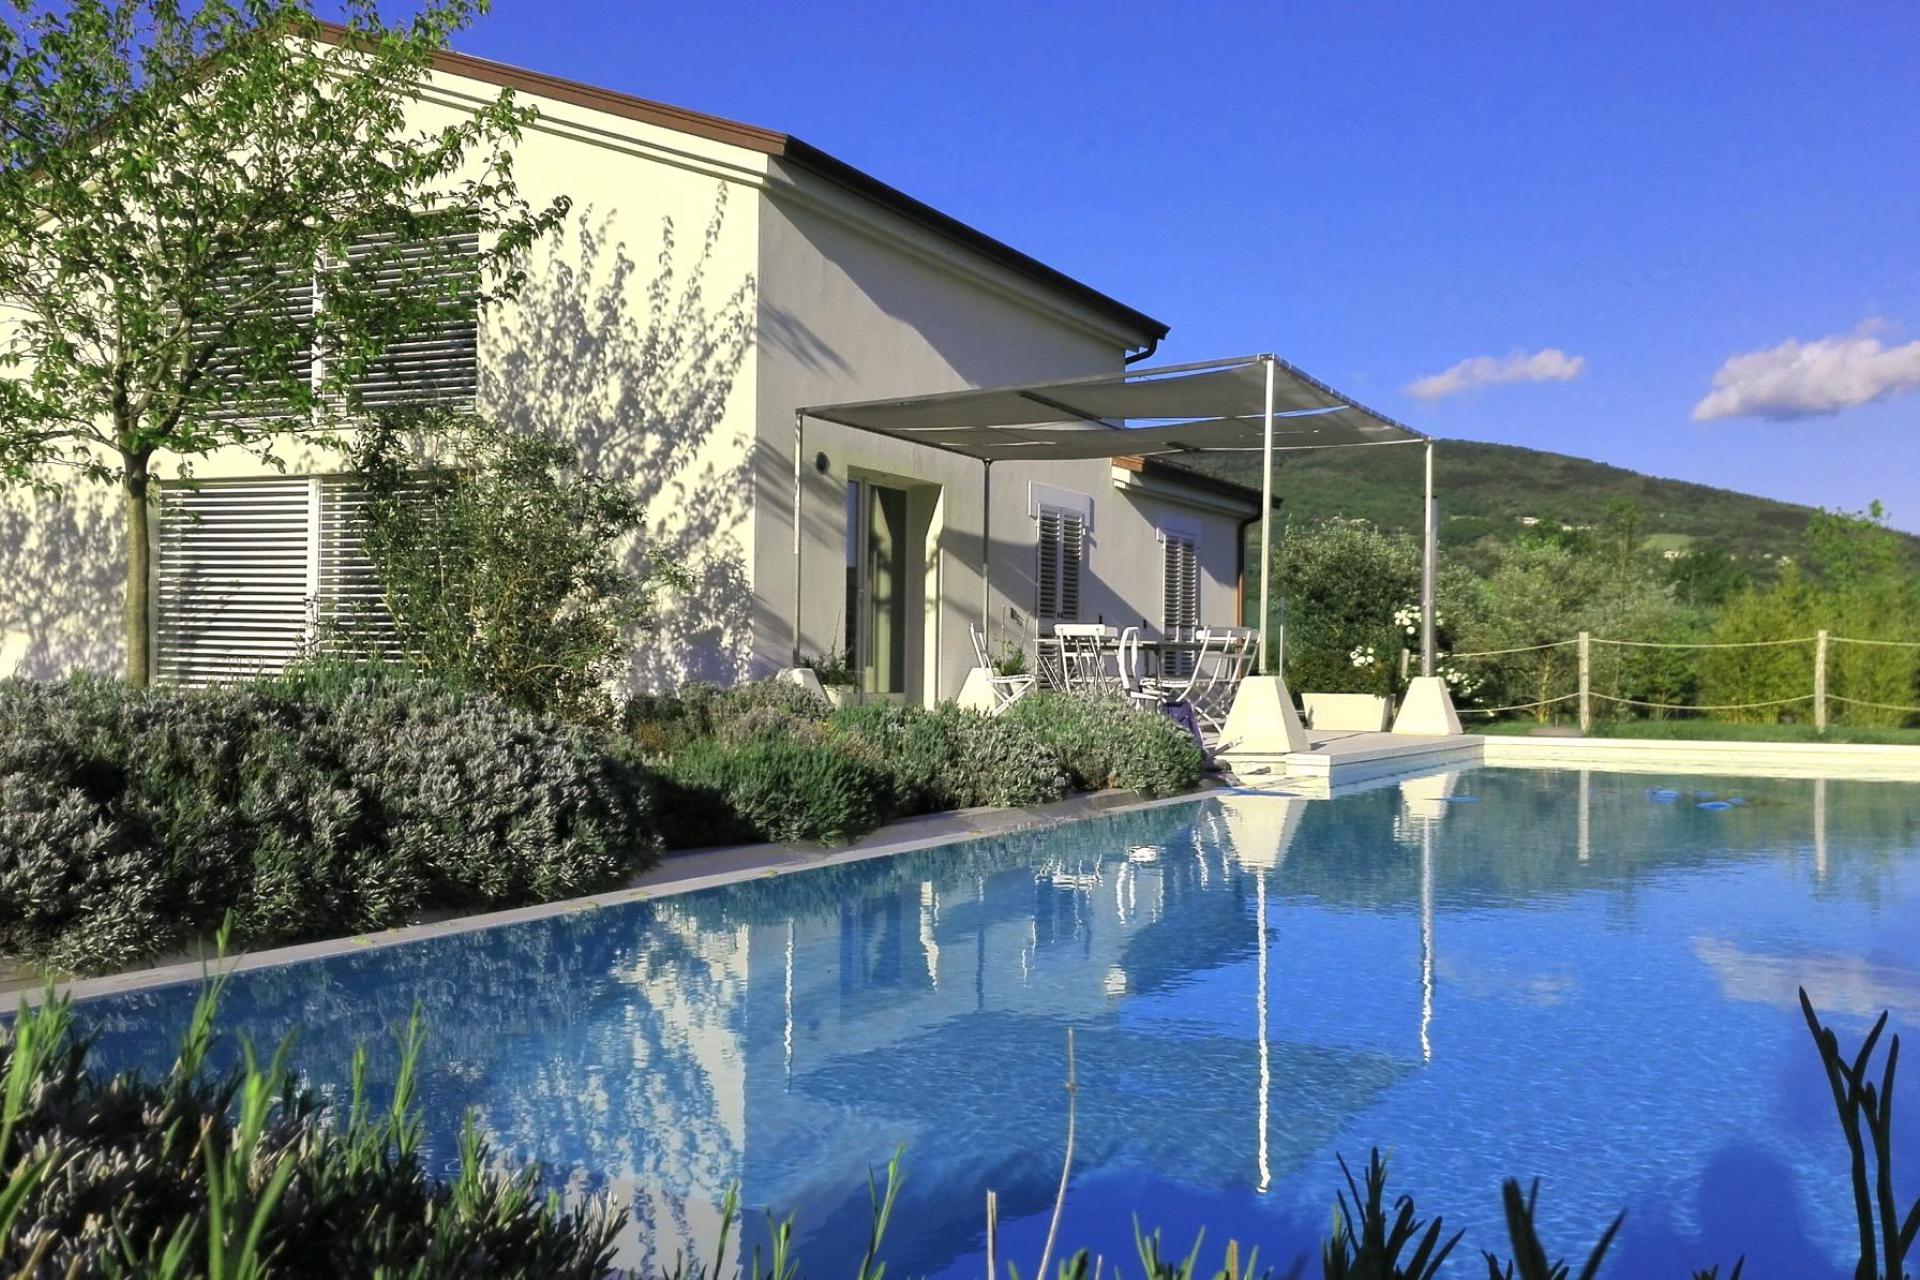 Luxury private villa & pool between Umbria and Marche